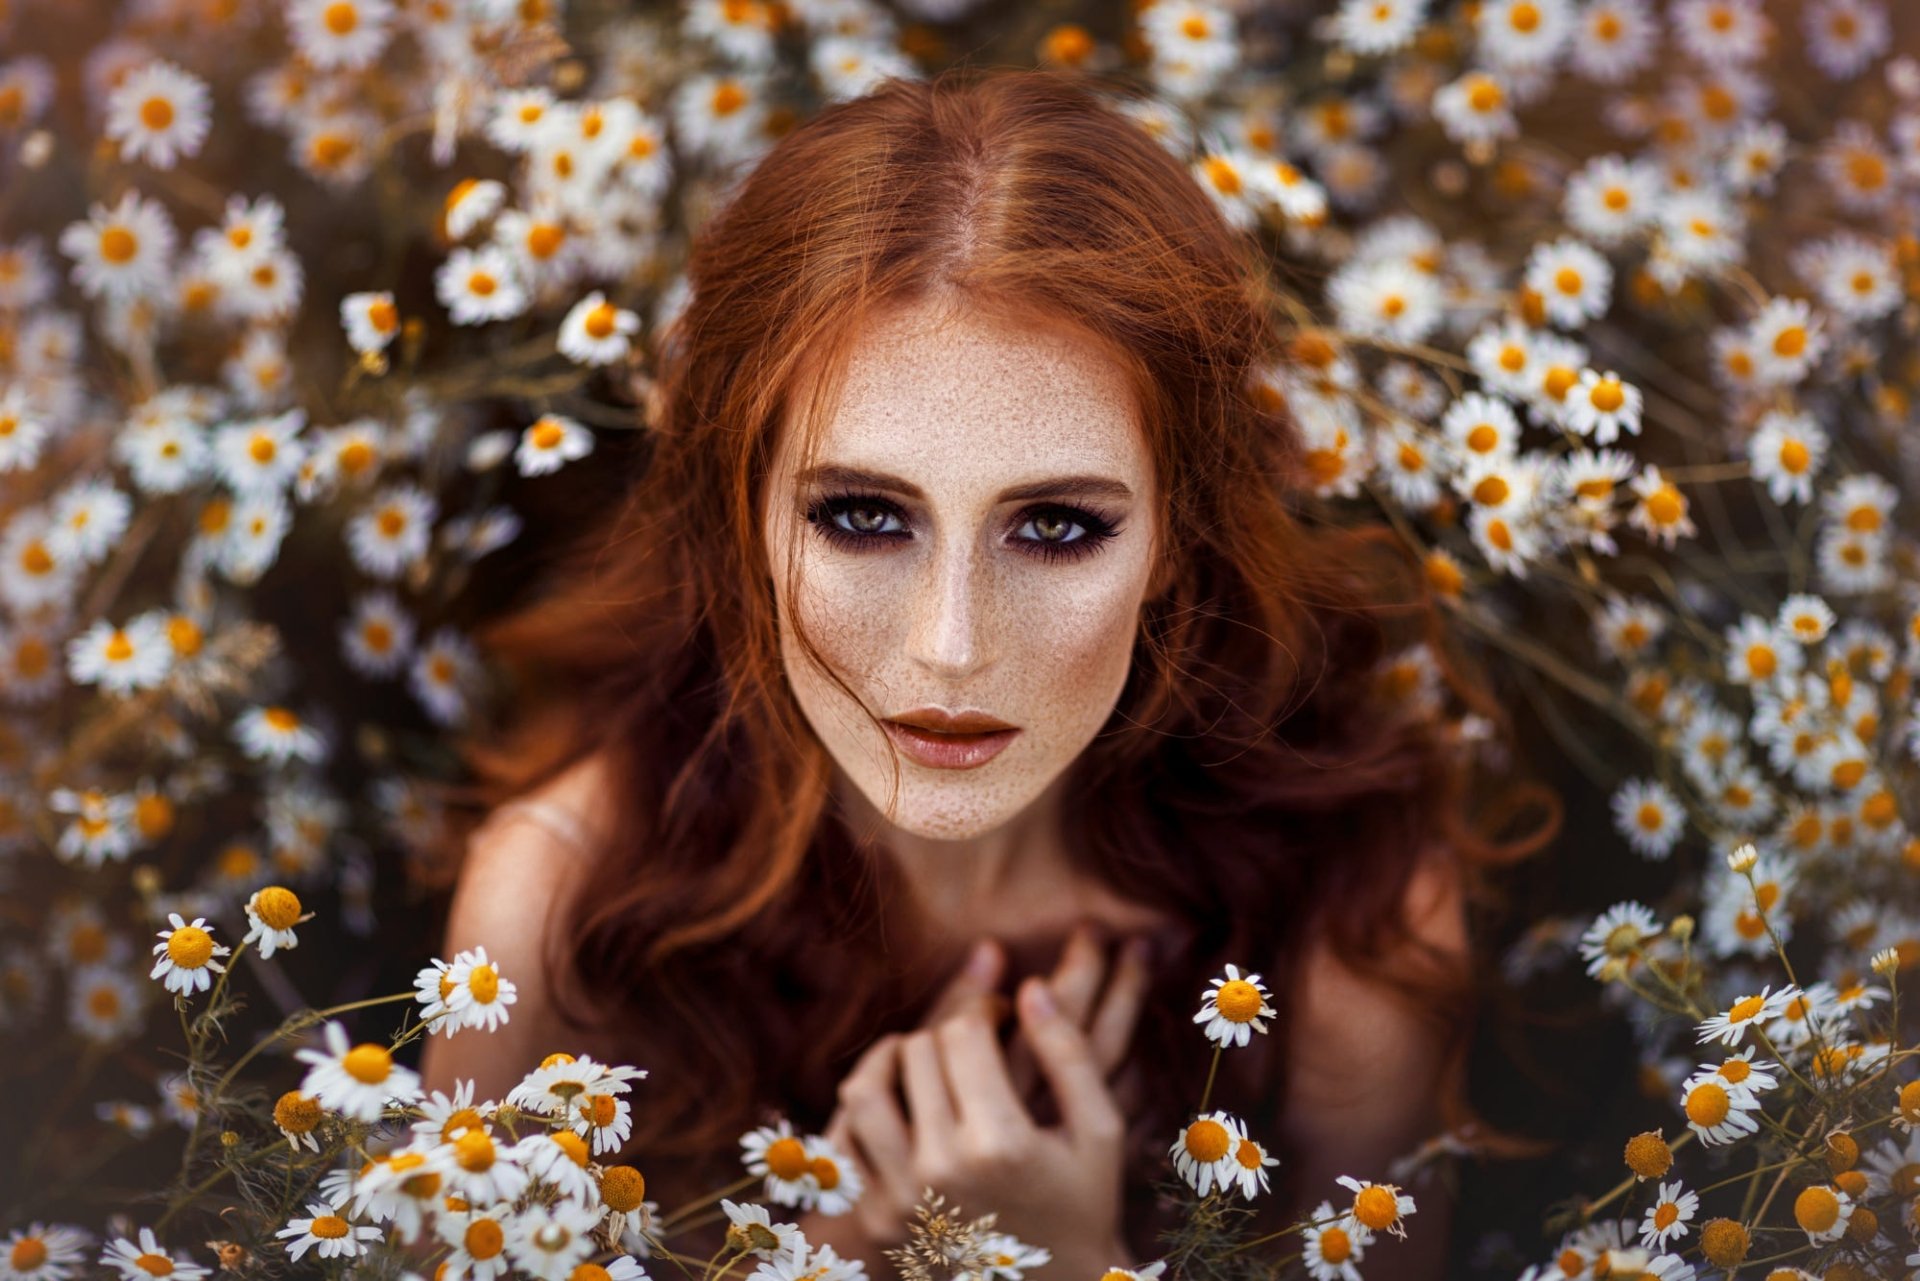 Women Model Flowers Plants Redhead Looking At Viewer Women Outdoors Outdoors 1920x1281